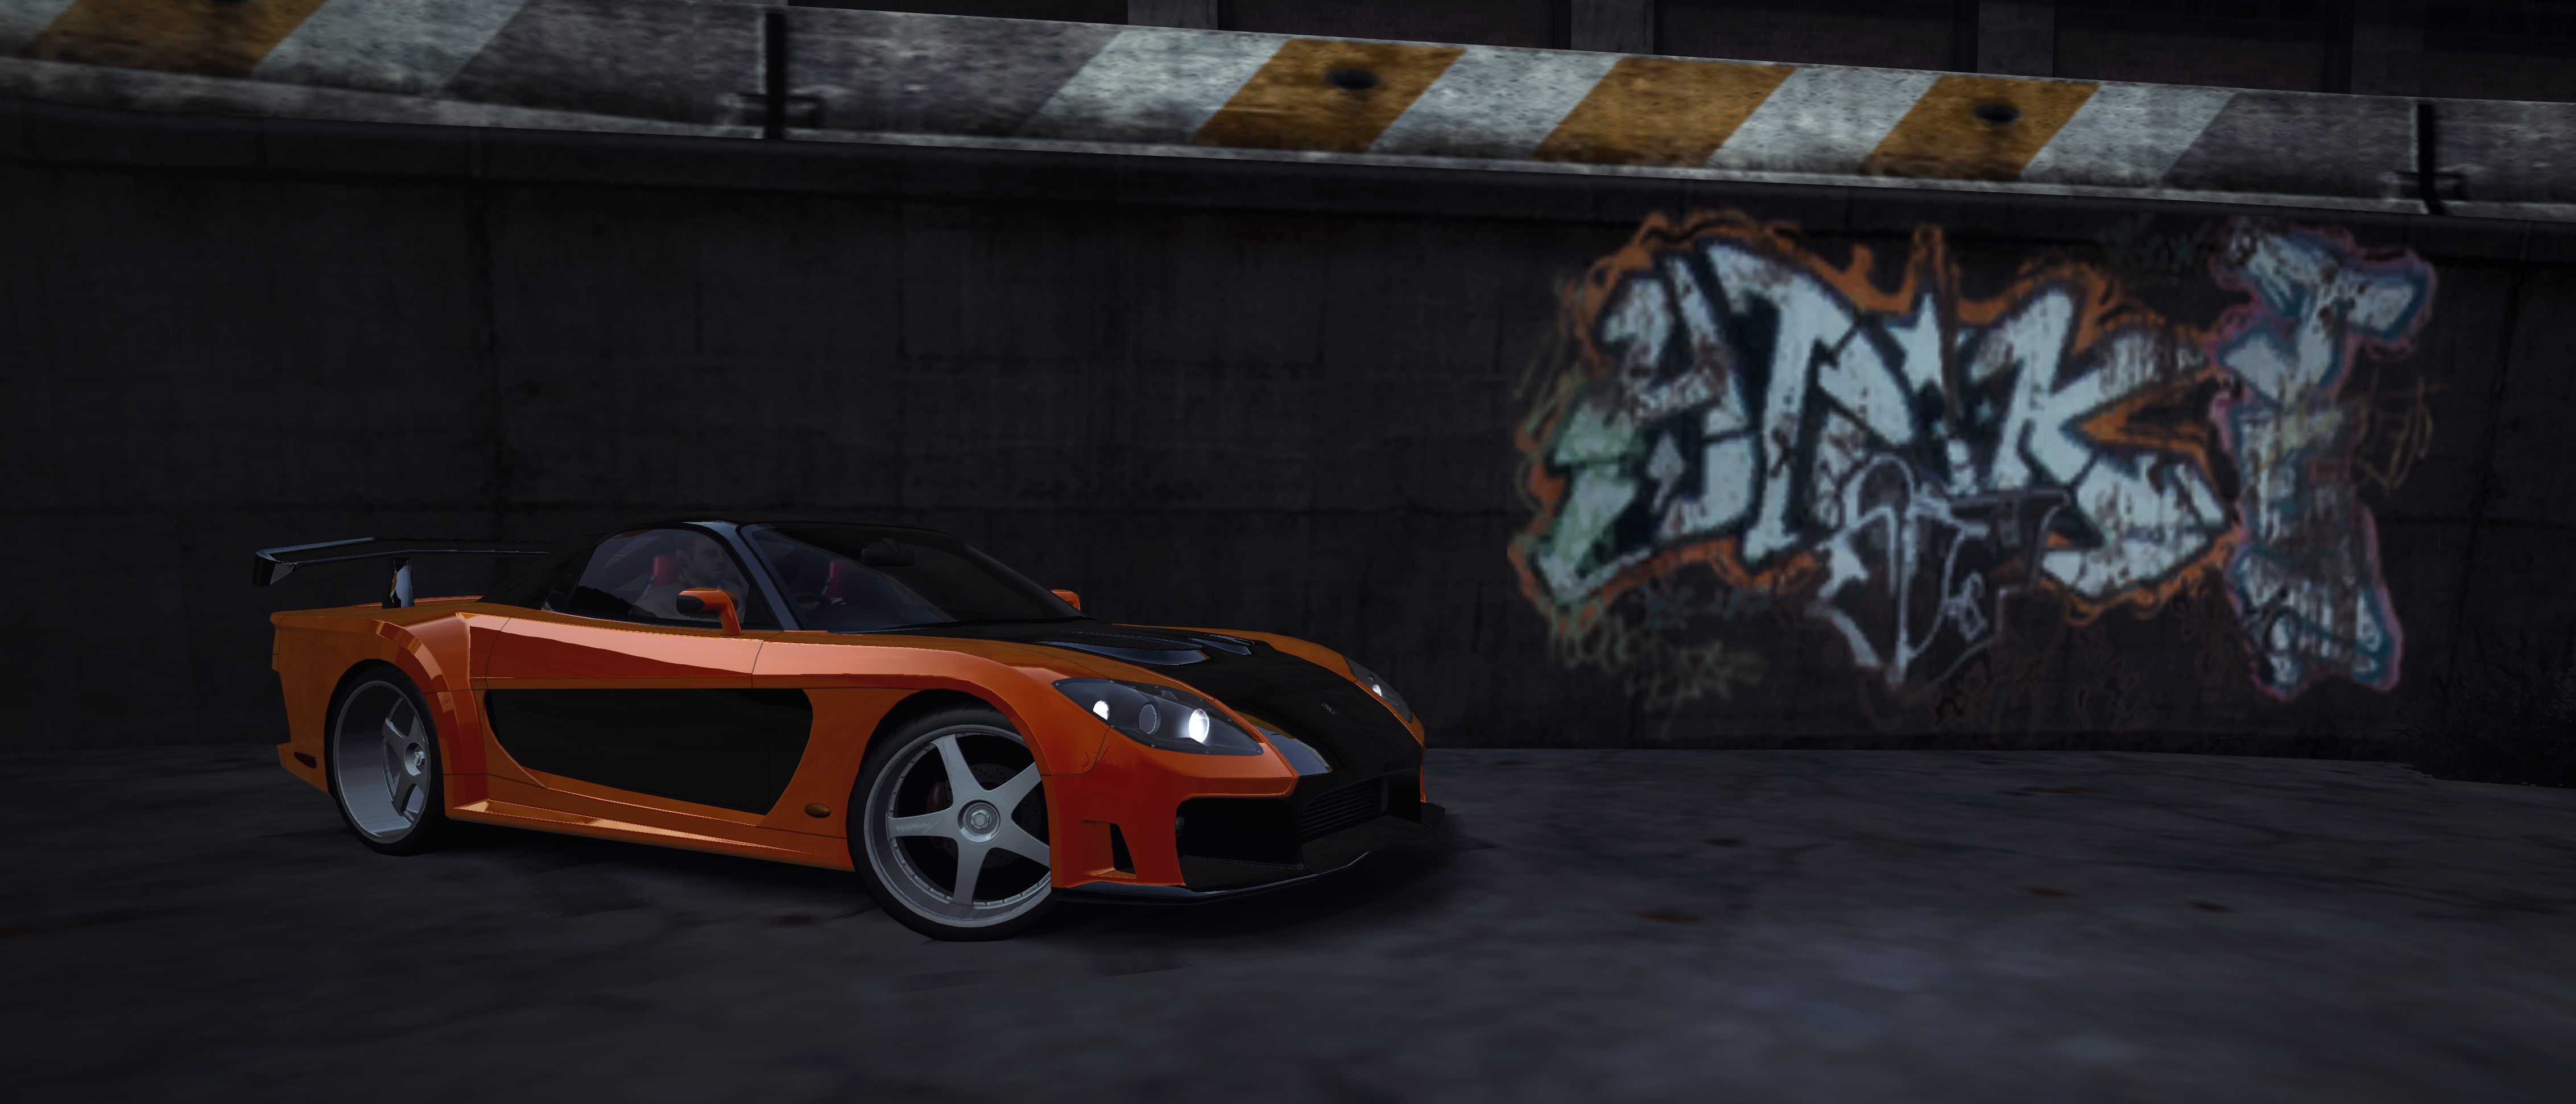 General 4529x1941 Need for Speed Need for Speed: World video games Mazda RX-7 Veilside Fast and Furious wide screen graffiti orange cars CGI frontal view headlights